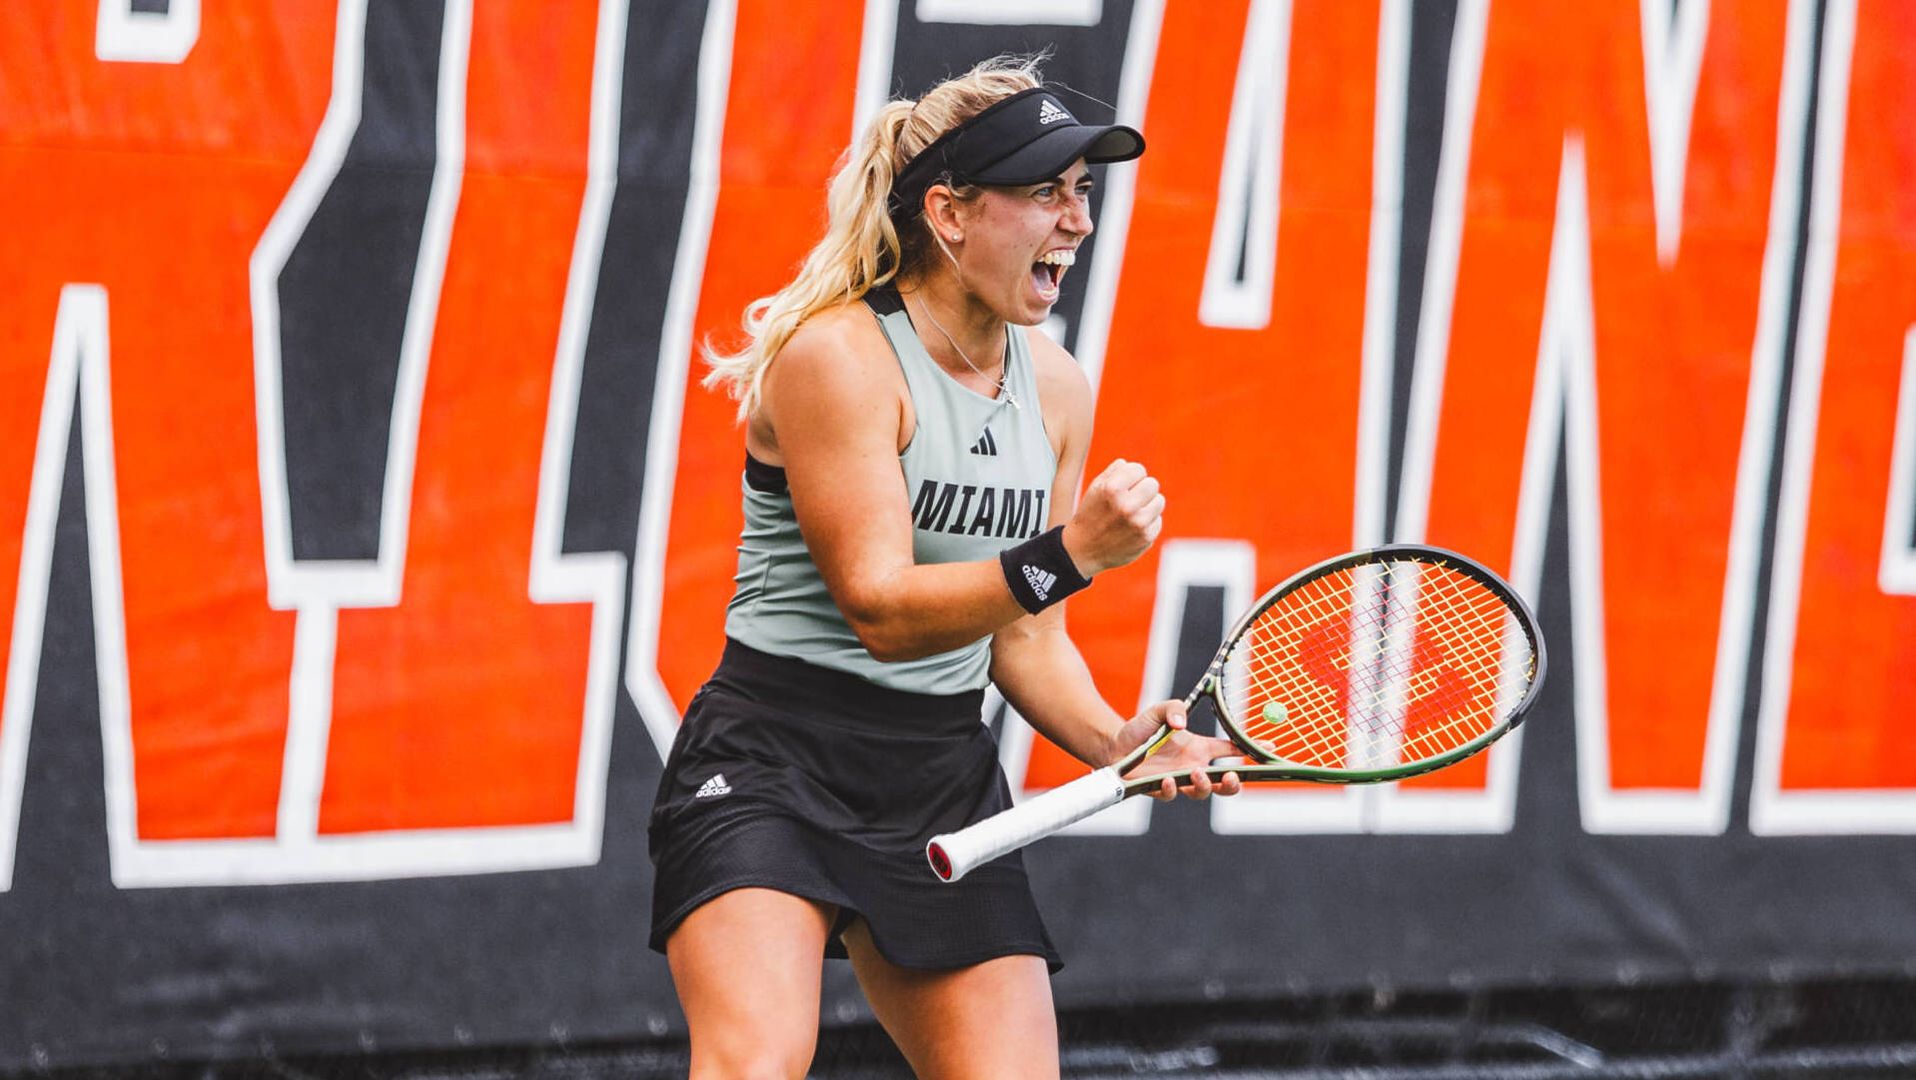 Miami Earns First Ranked Win Over No. 9 Texas A&M